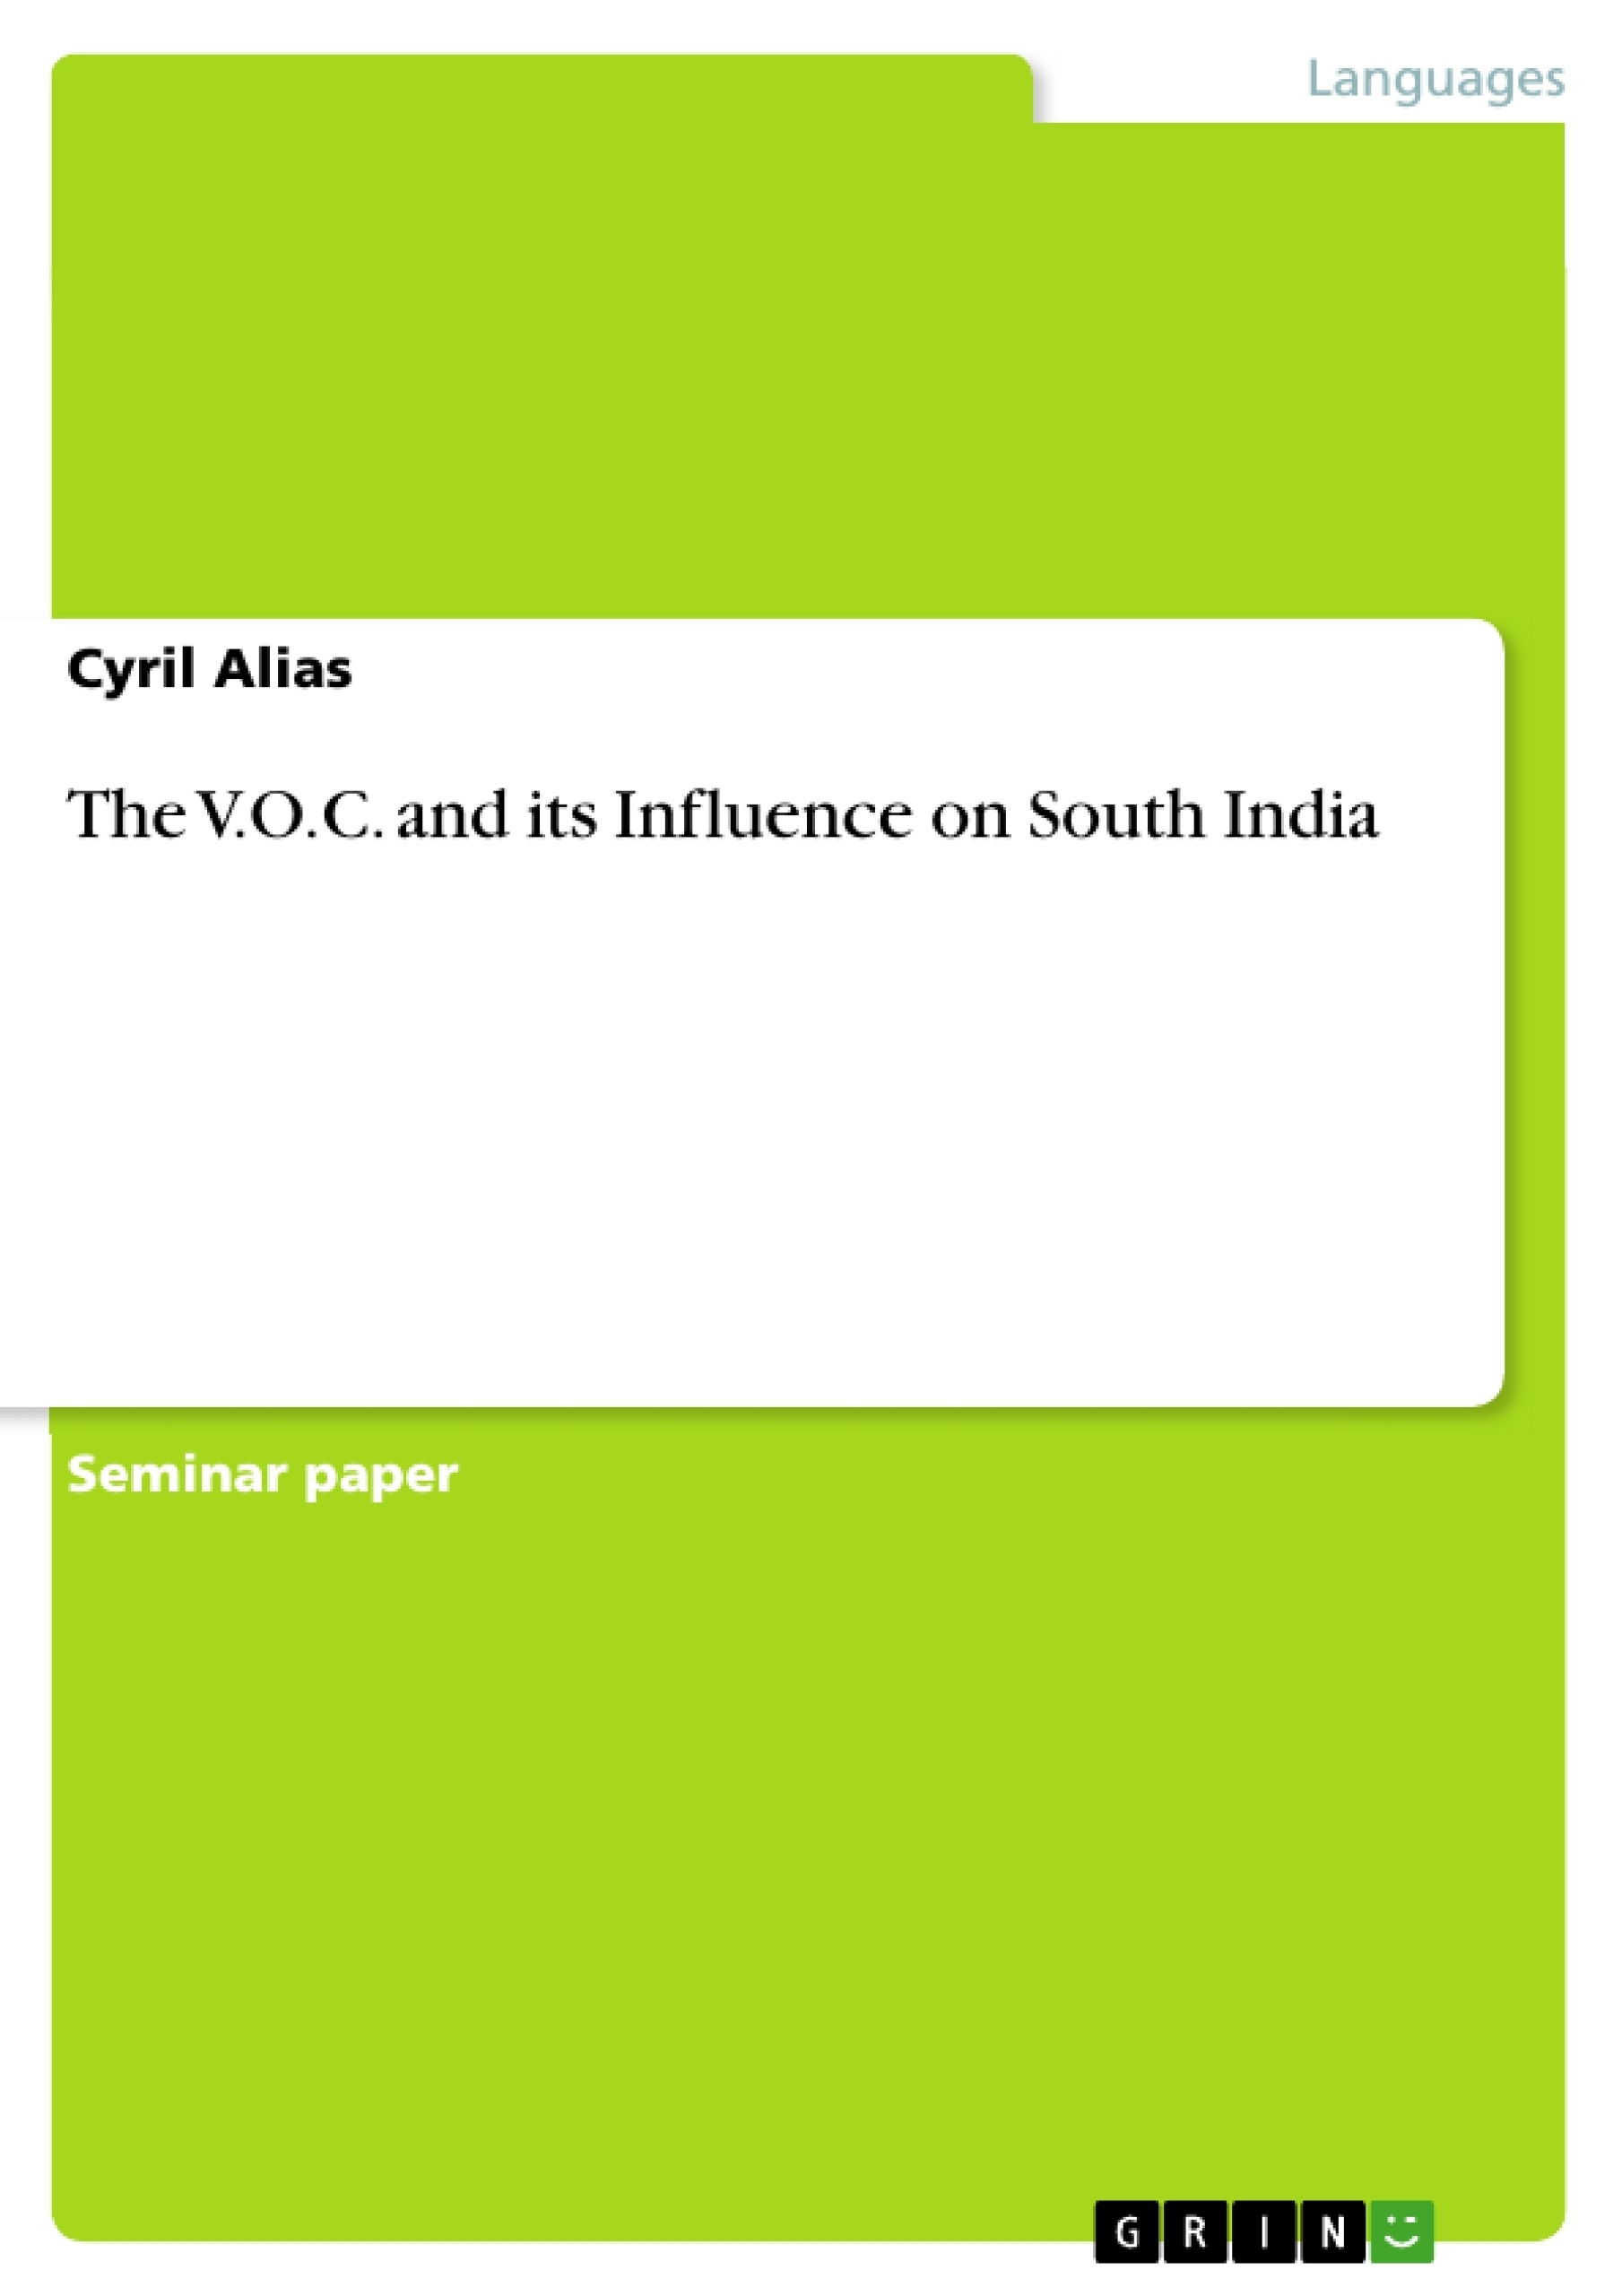 Title: The V.O.C. and its Influence on South India